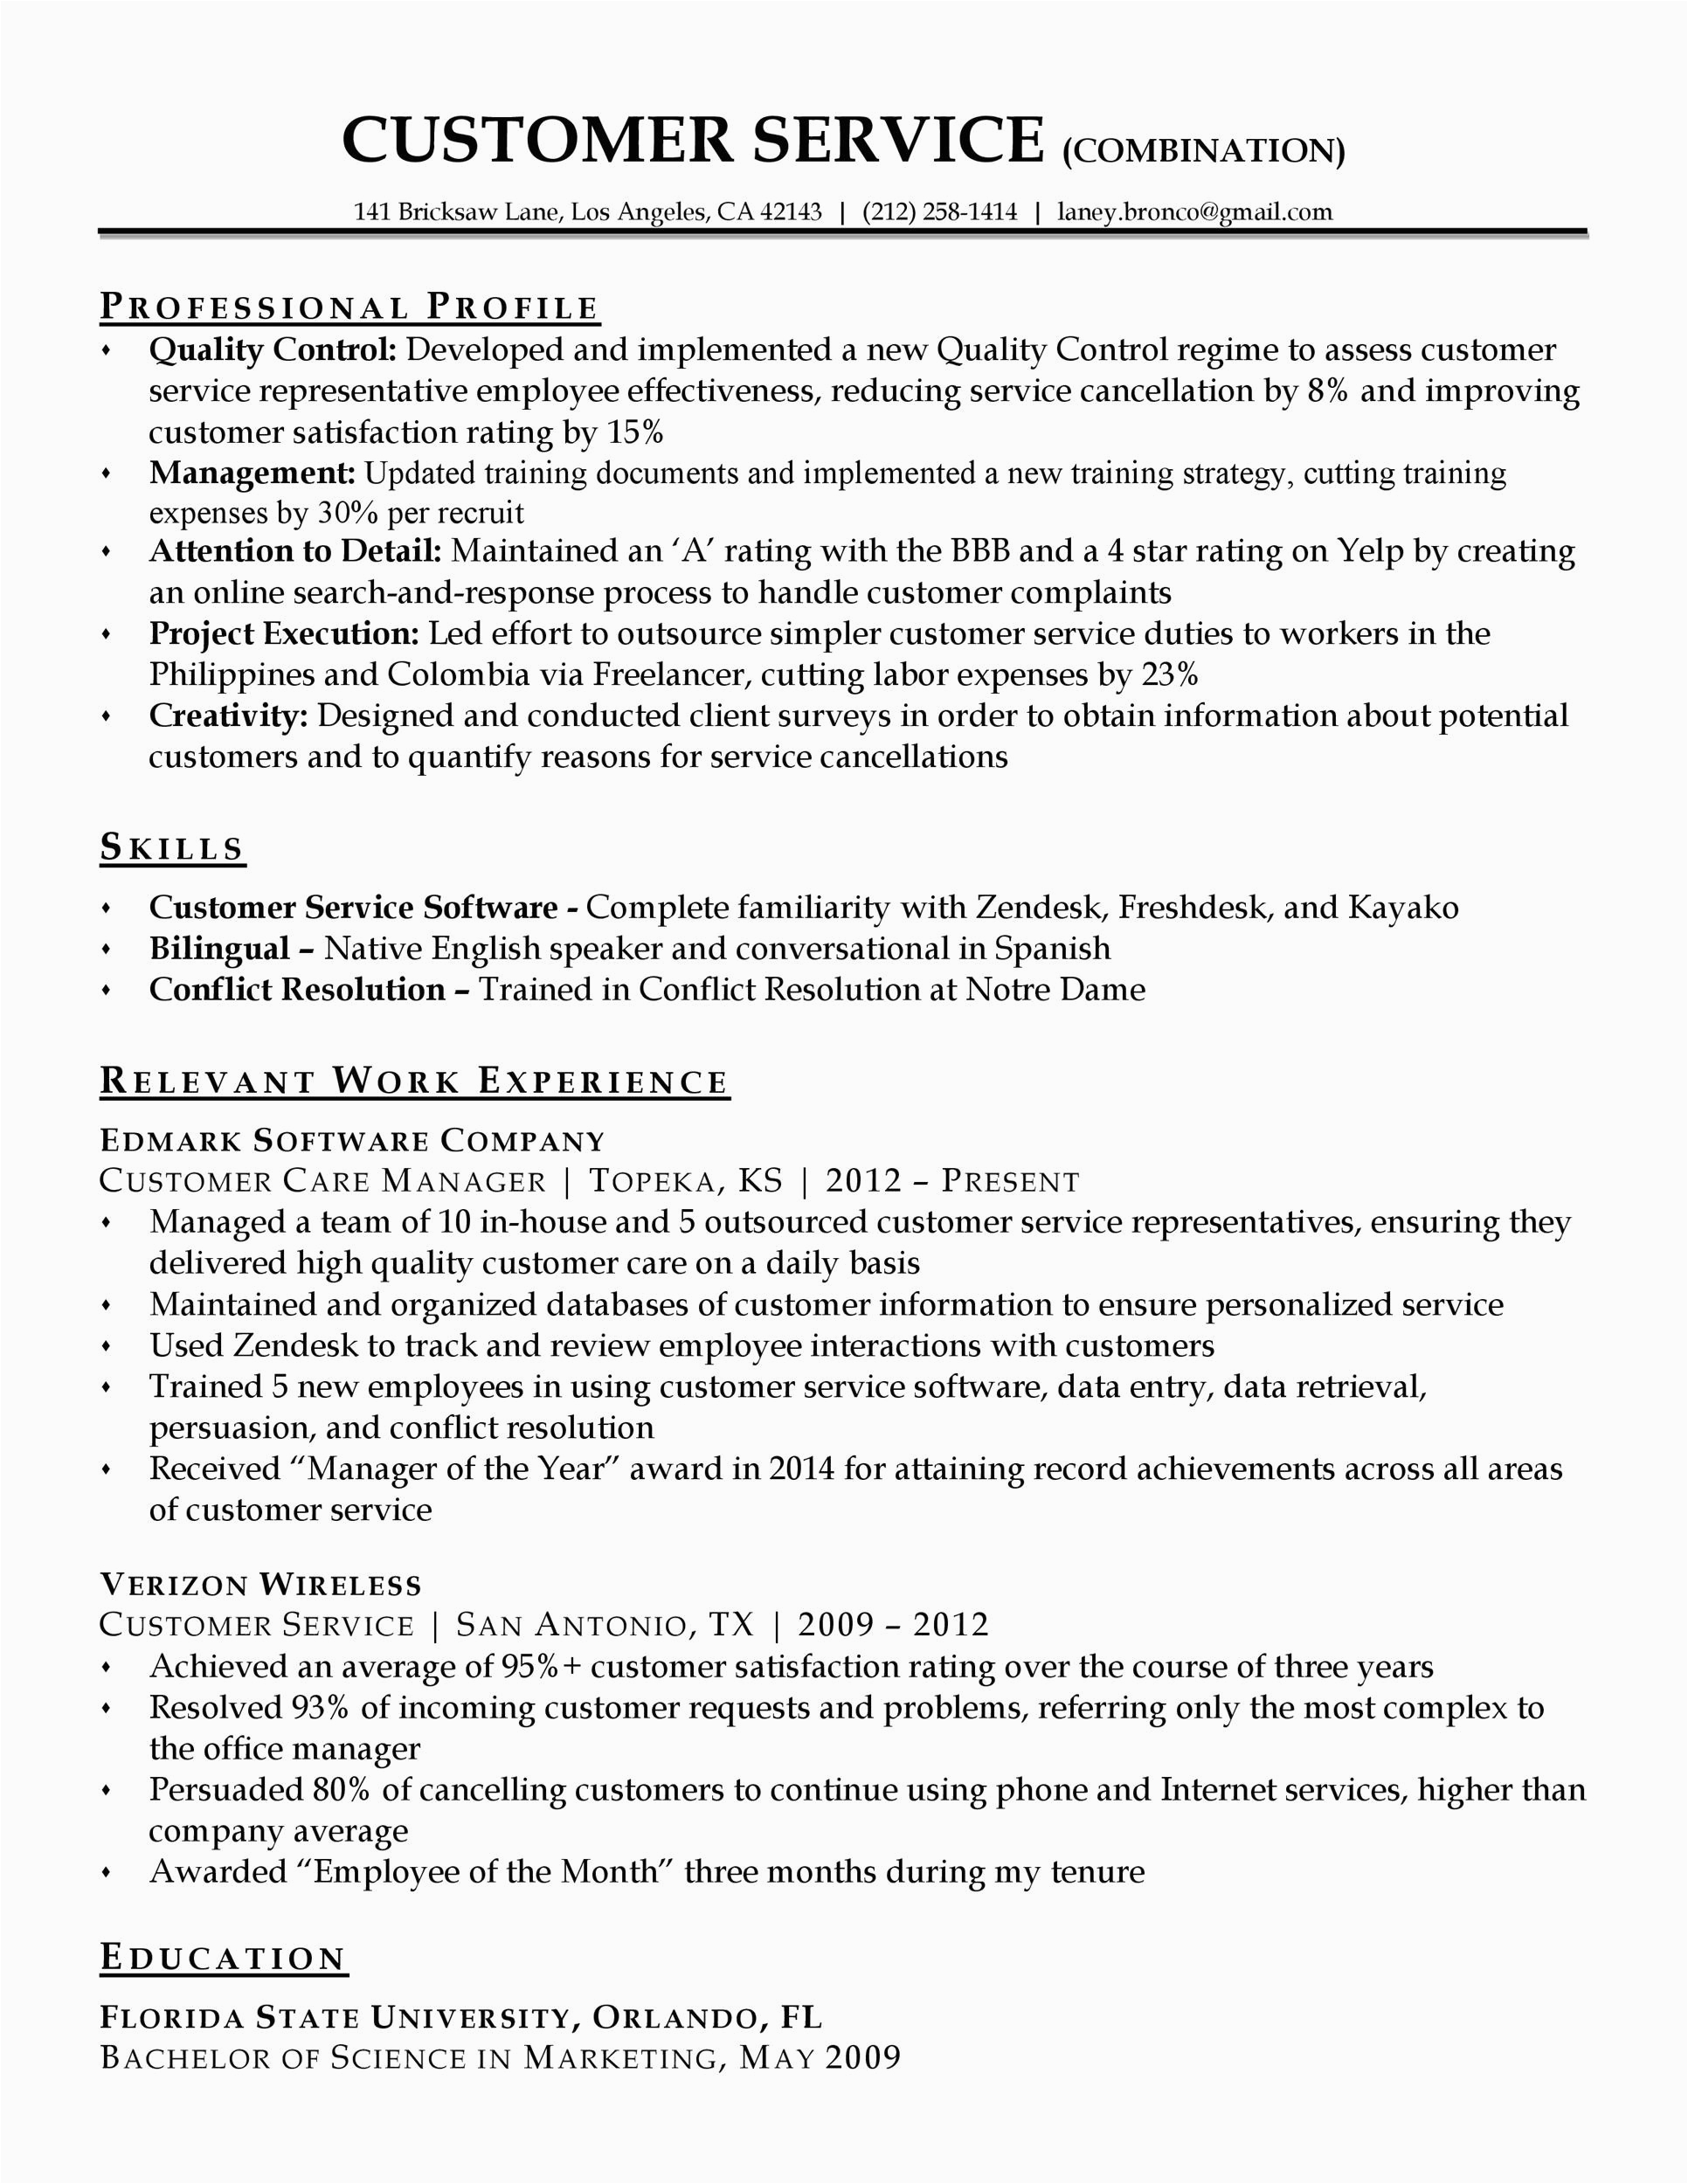 Samples Of Functional Resumes Customer Service 30 Customer Service Resume Examples Templatelab